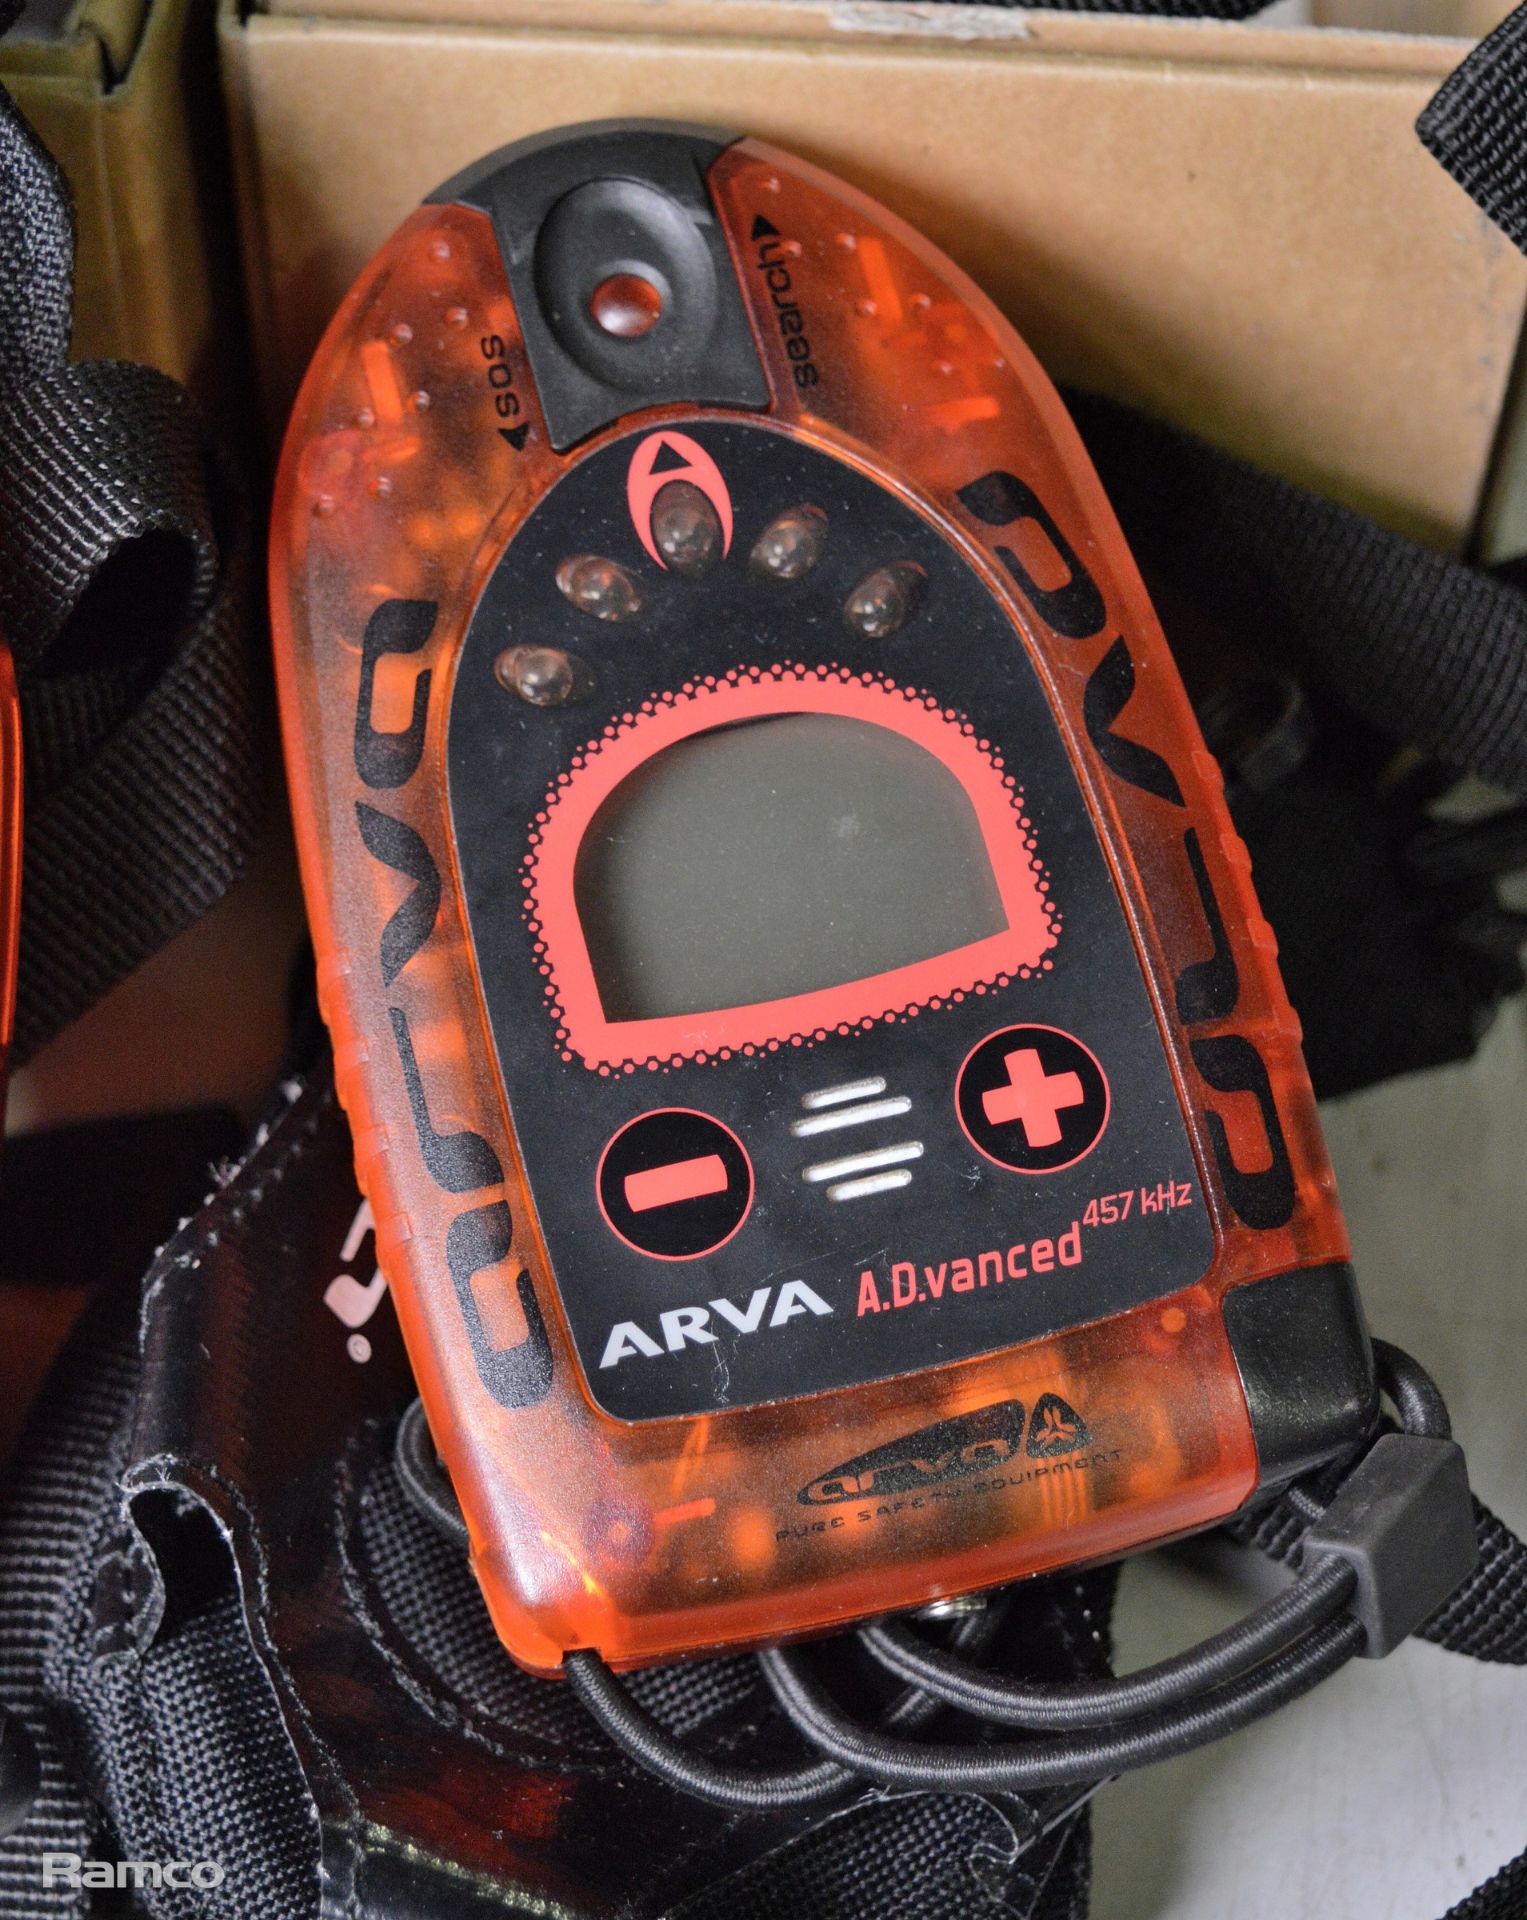 2x Arva Advanced Avalanche Transceivers 457mhz - Image 2 of 2